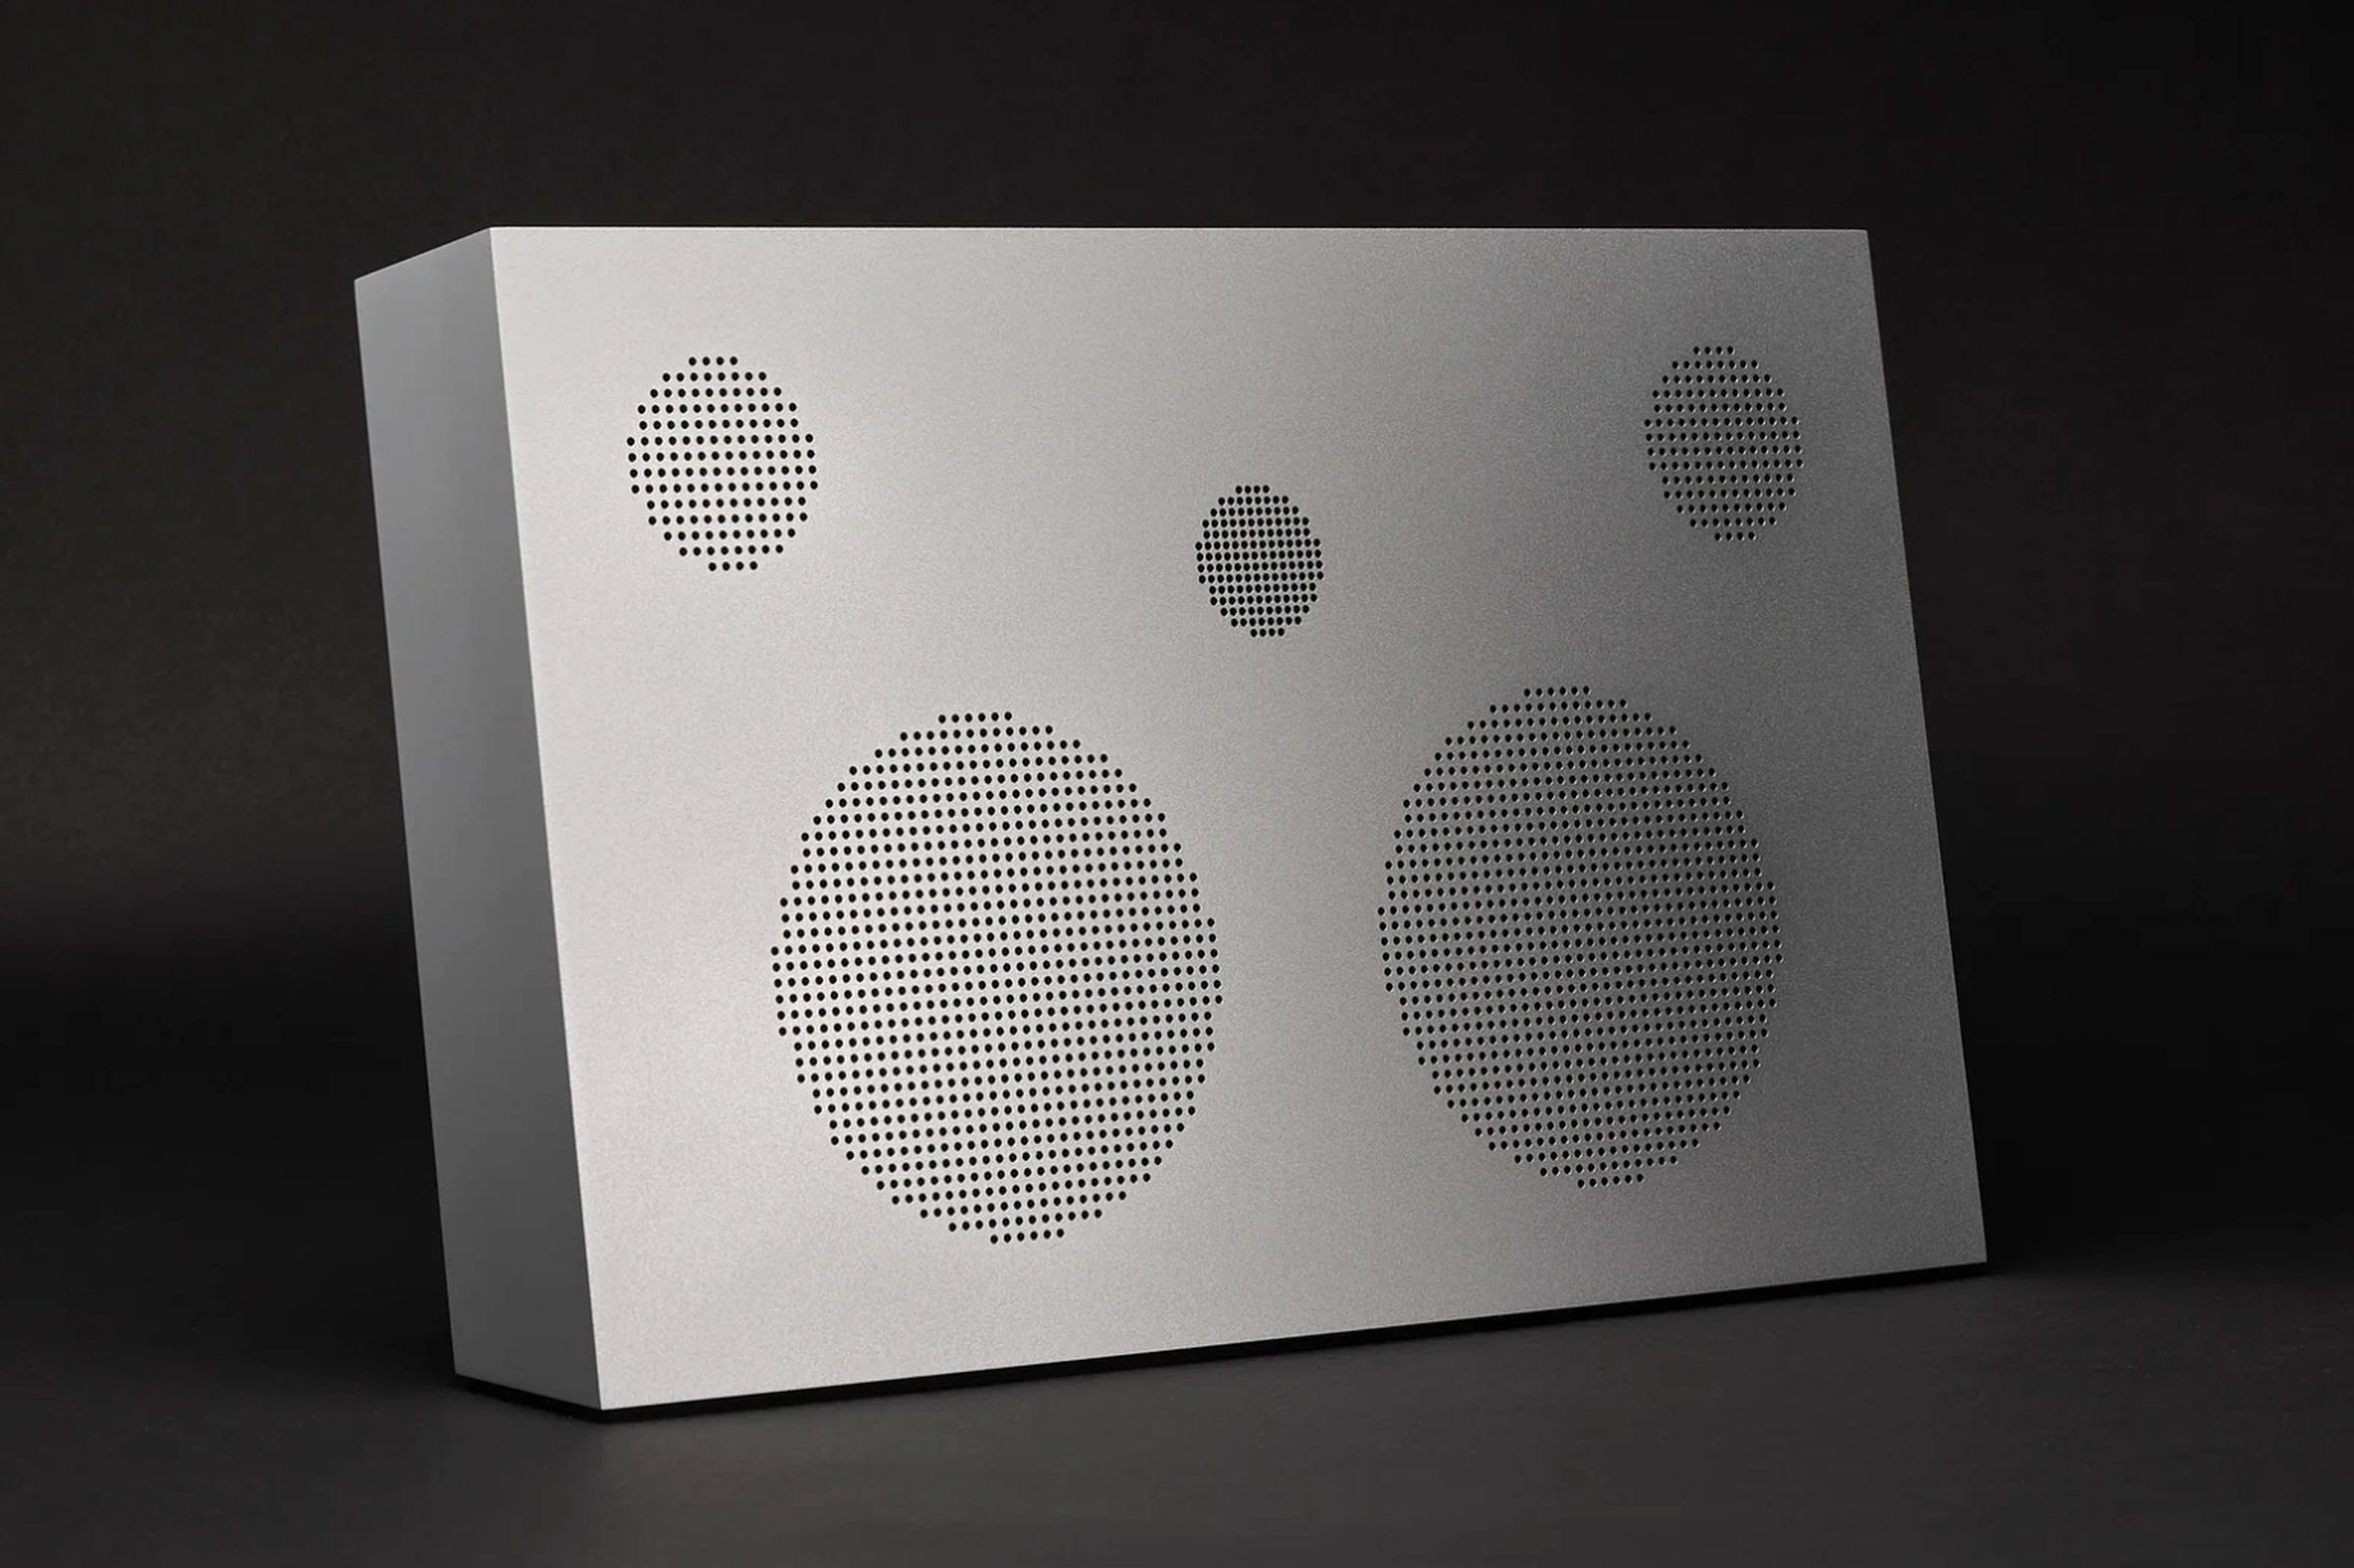 The all-metal Nocs Labs Monolith x Aluminum speaker in a silver finish.